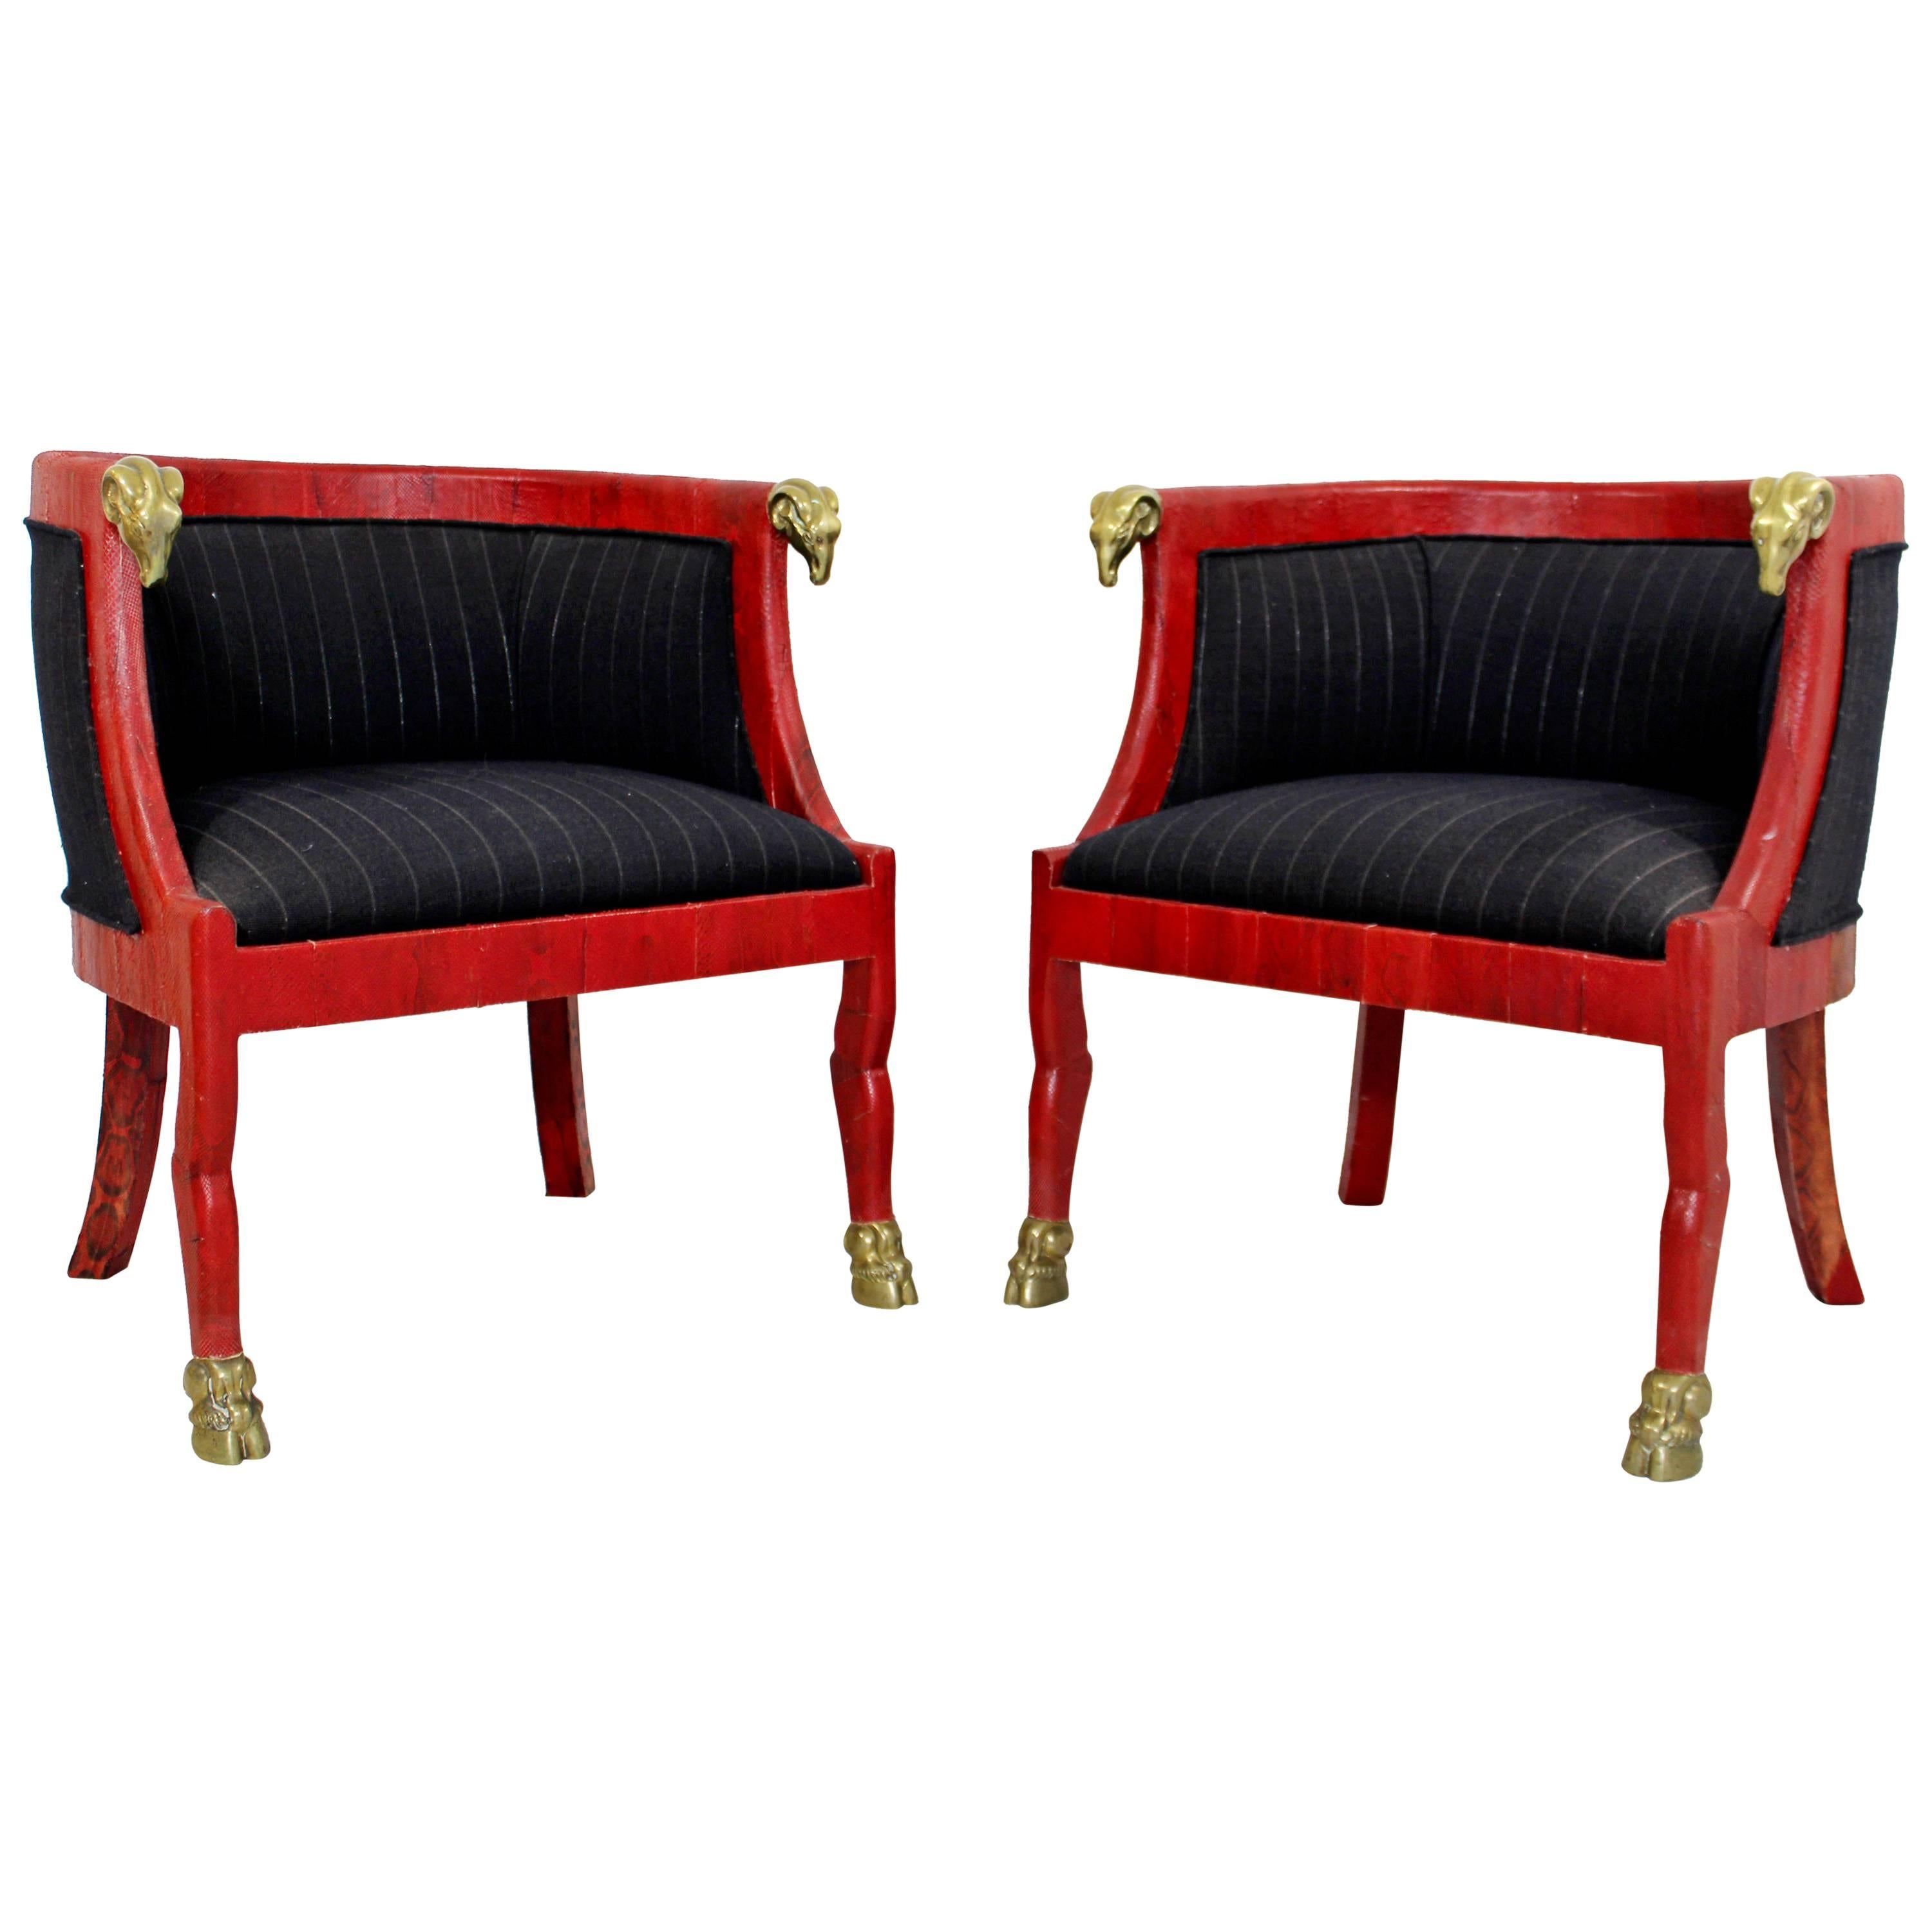 Hollywood Regency Pair of Red Goatskin Barrel Chairs